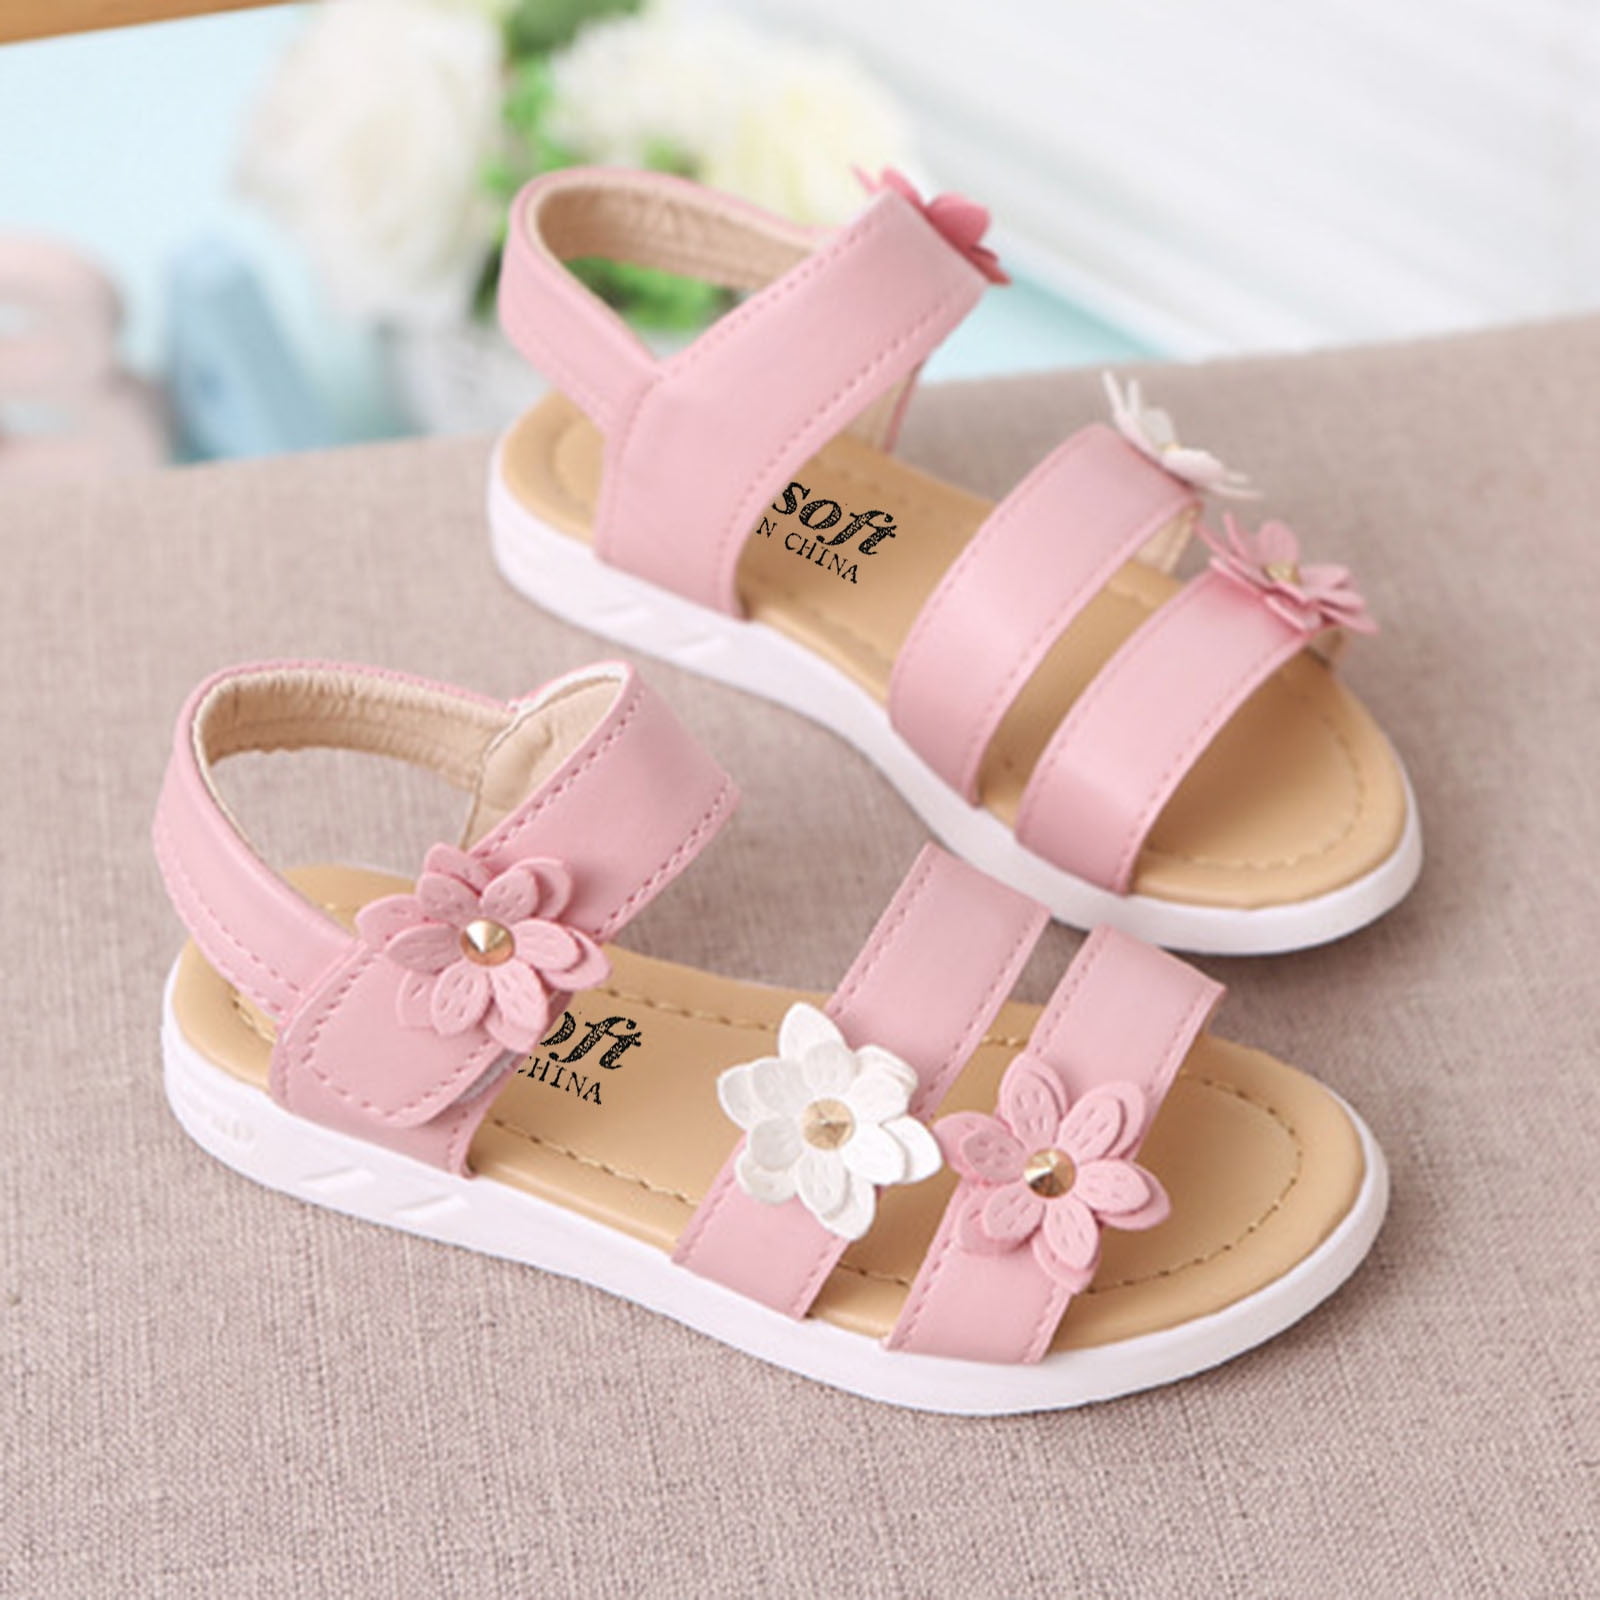 LEEy-World Sandals for Girls Children Shoes Children Leather Shoes White  Bow Knot Spring Autumn Gir High Heel Princess Shoes Pearl Single Shoes